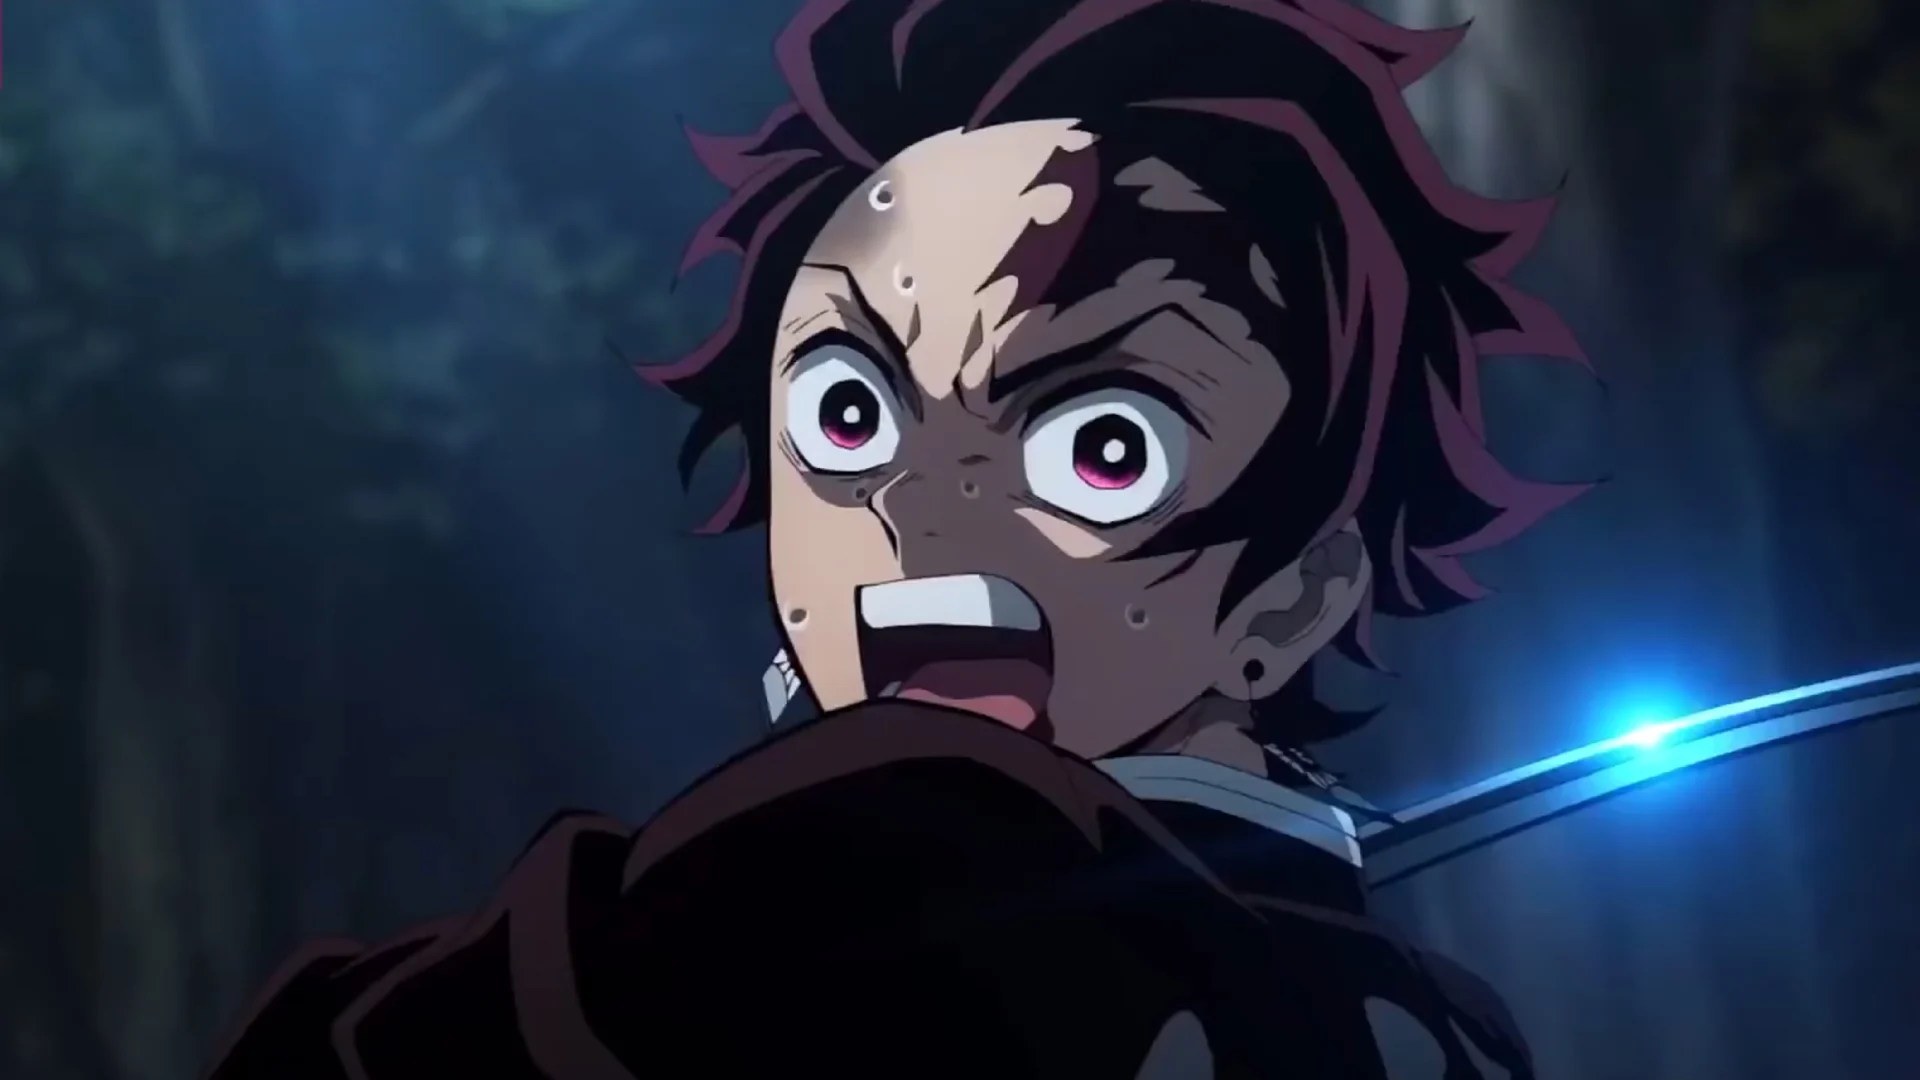 Demon Slayer Season 4 Release Date Rumors: When Is It Coming Out?